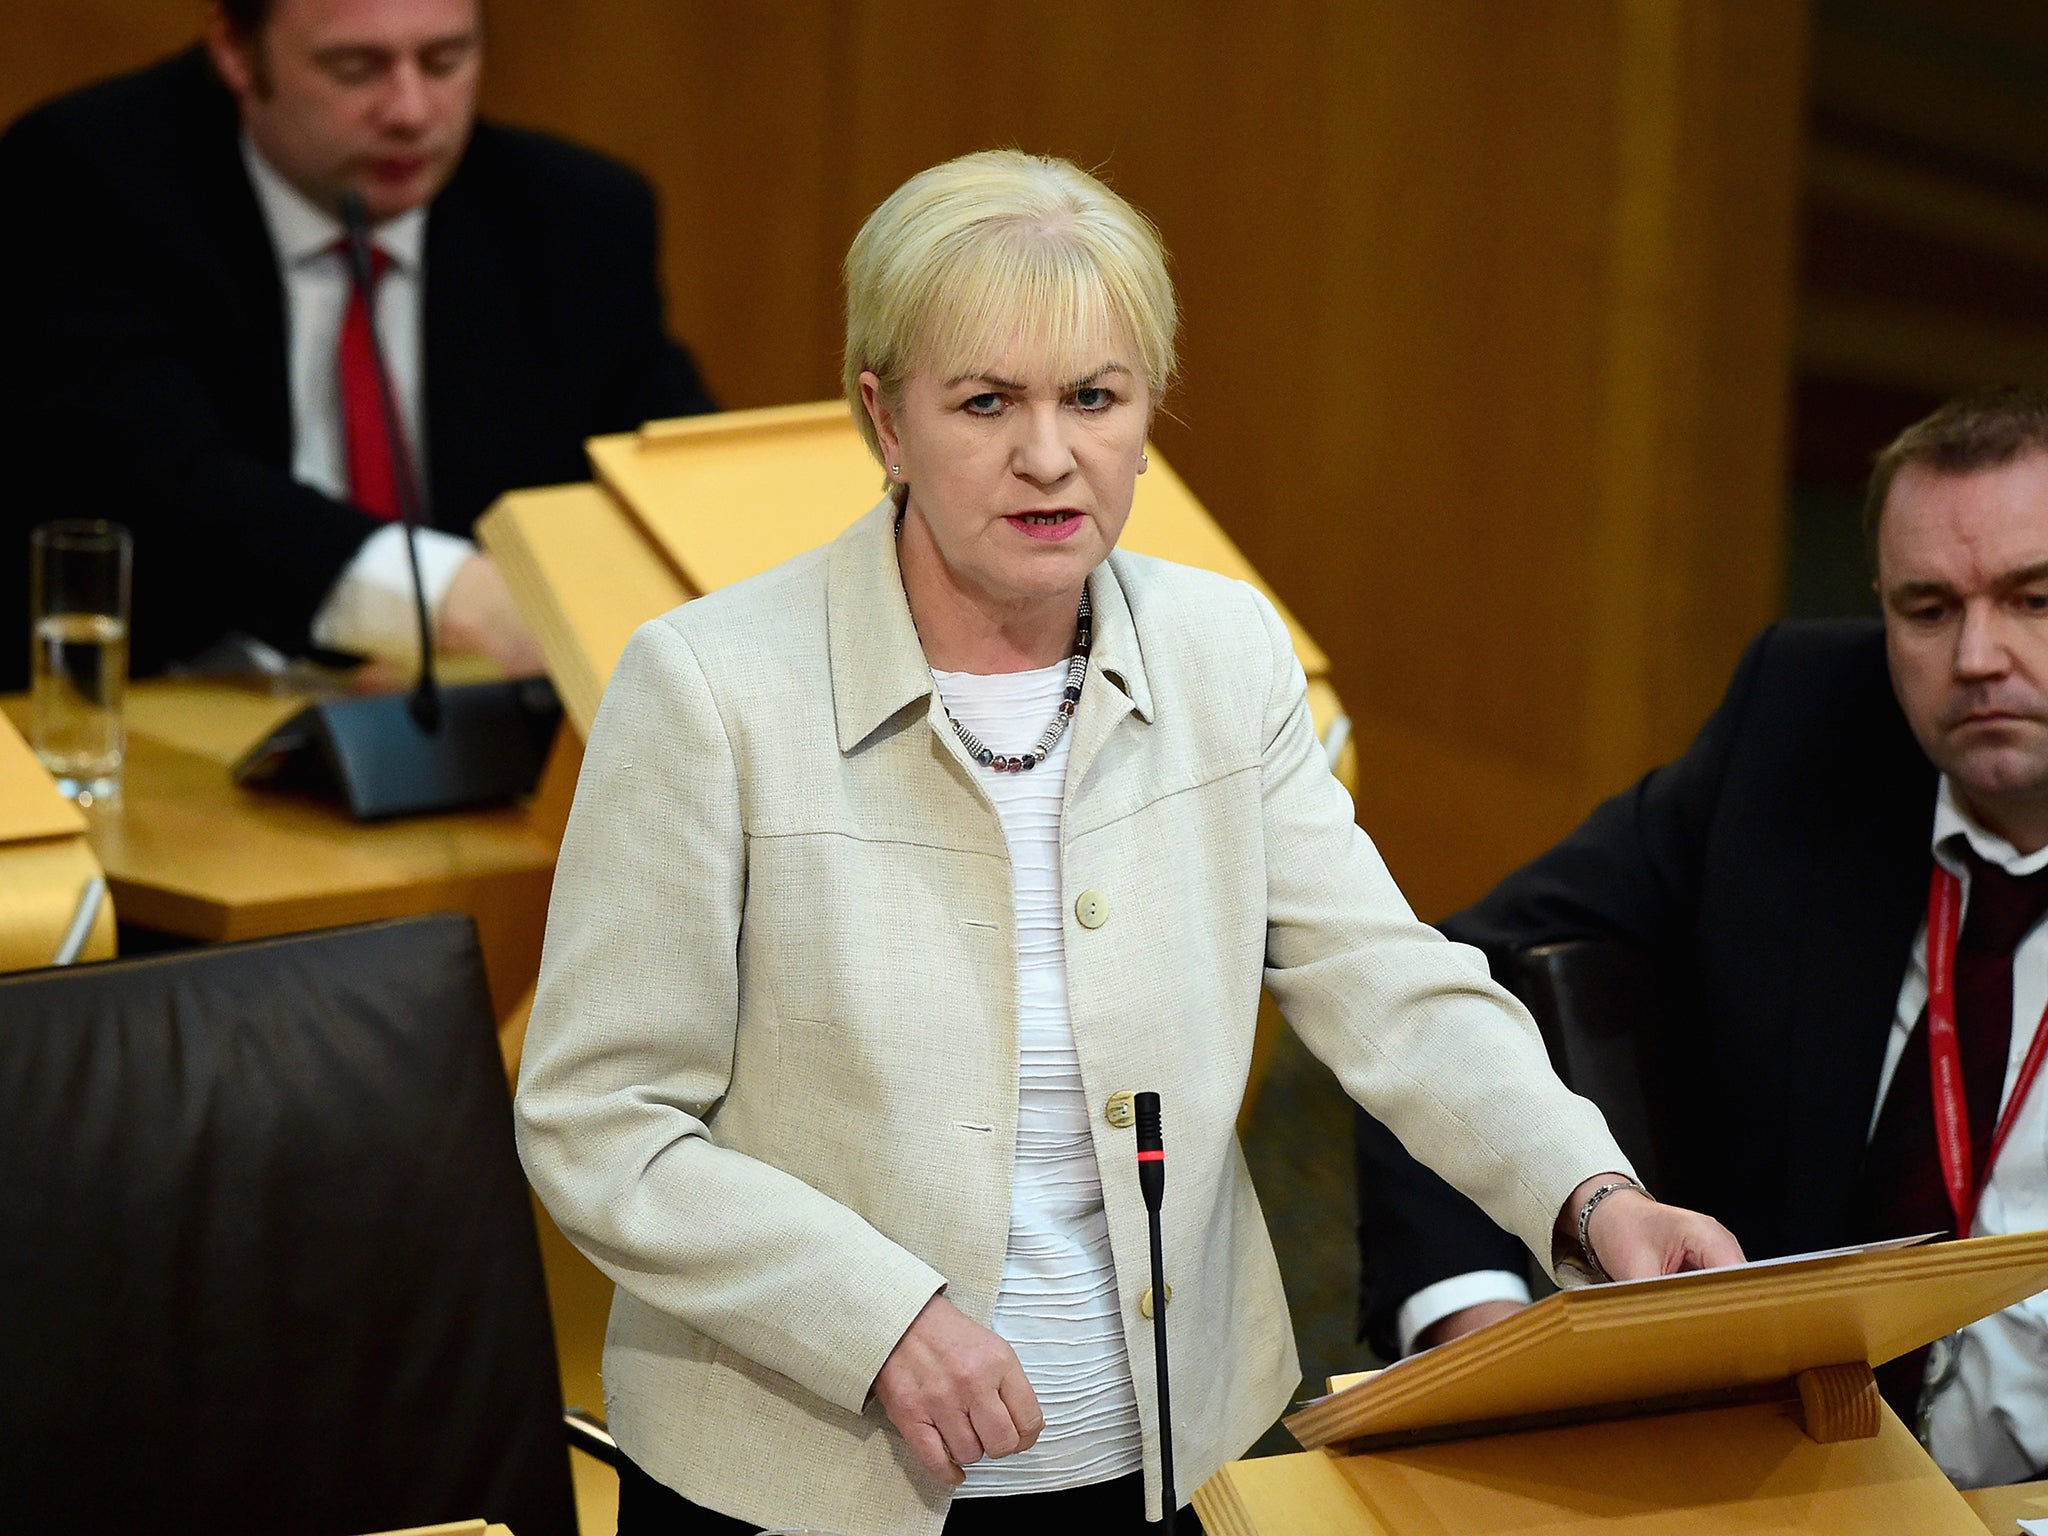 Johann Lamont has represented her constituency since 1999